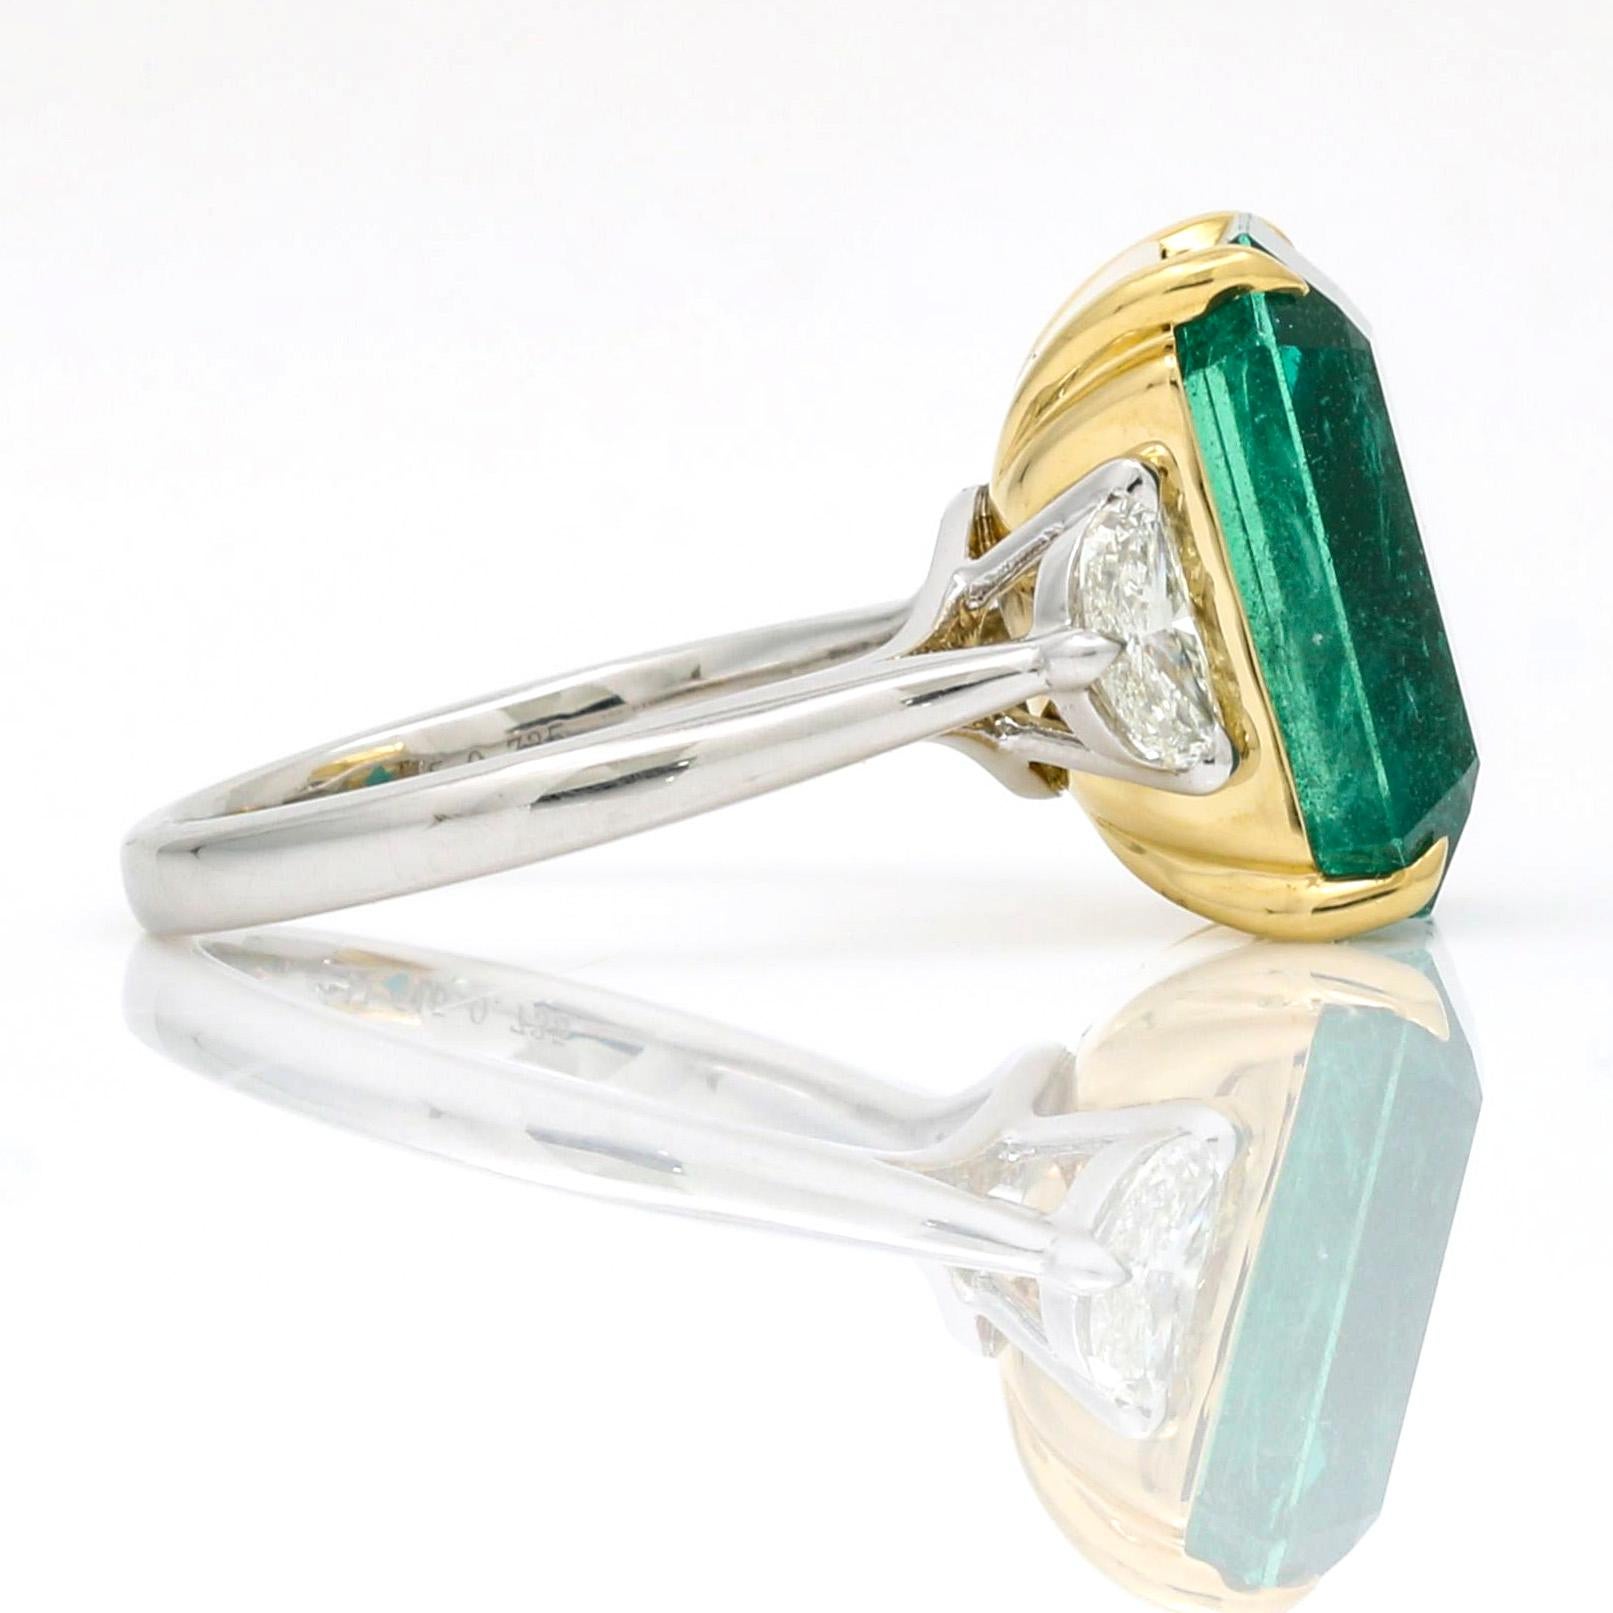 Women's emerald and diamond ring with a crescent-cut diamond on the sides crafted in 18k yellow gold and platinum. A large translucent emerald-cut emerald set in a yellow gold basket with a half-moon diamond on each side and a polished shank in